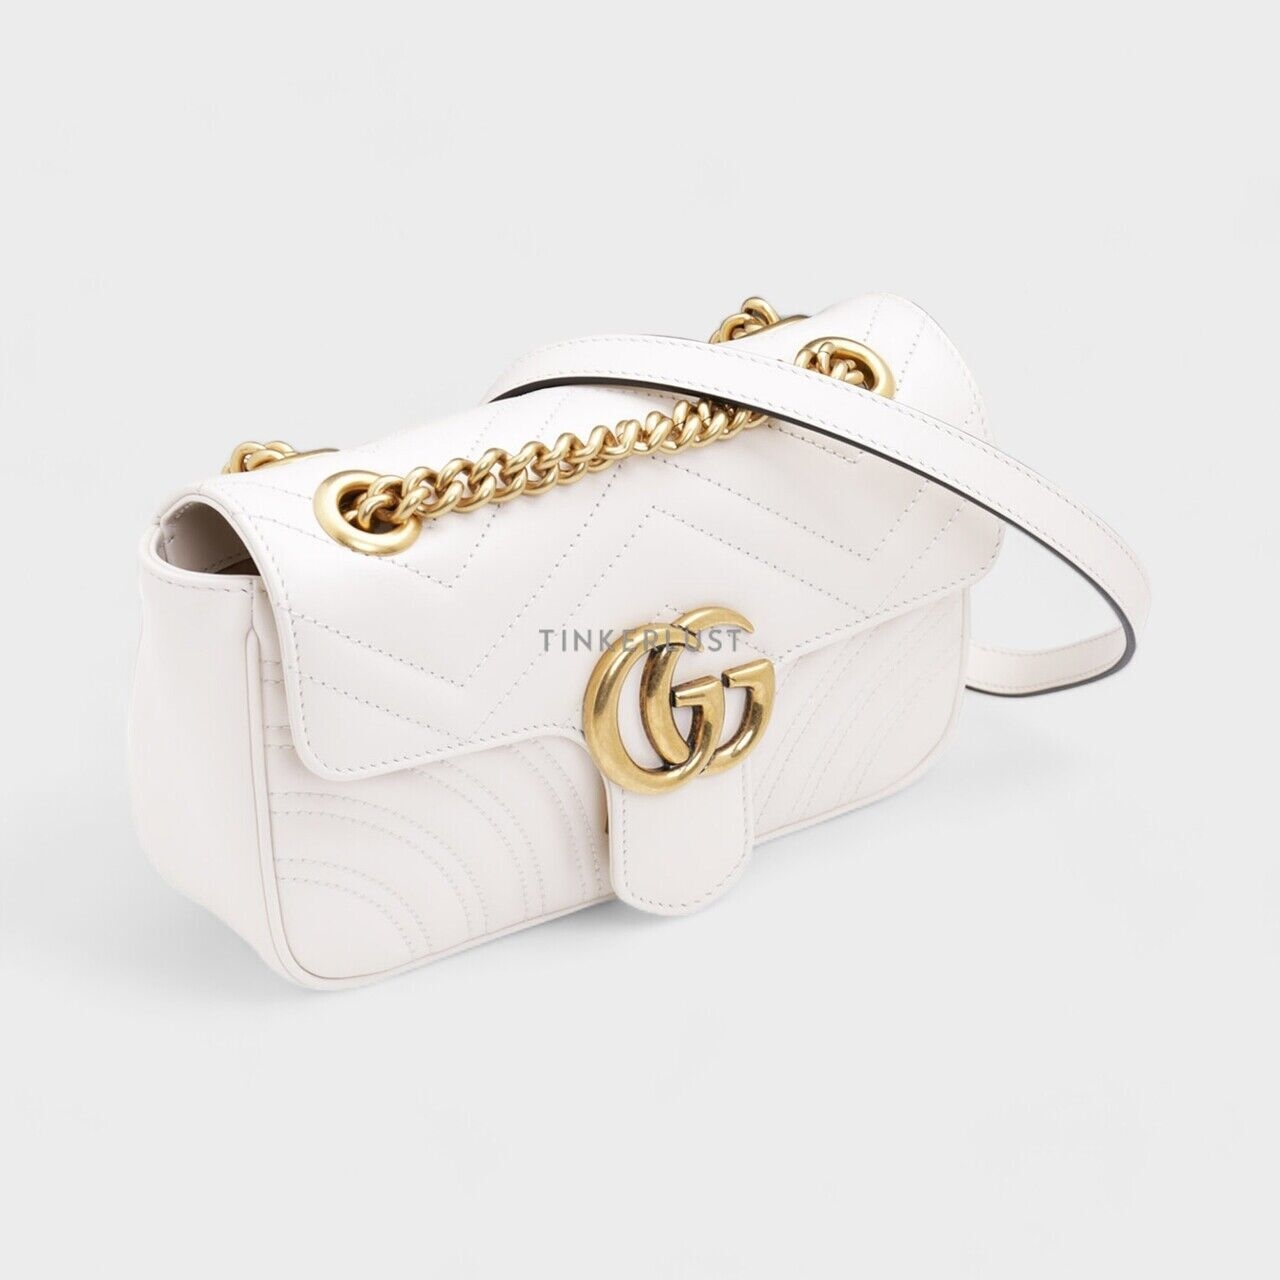 Gucci Mini GG Marmont in White GHW Flap Shoulder Bag